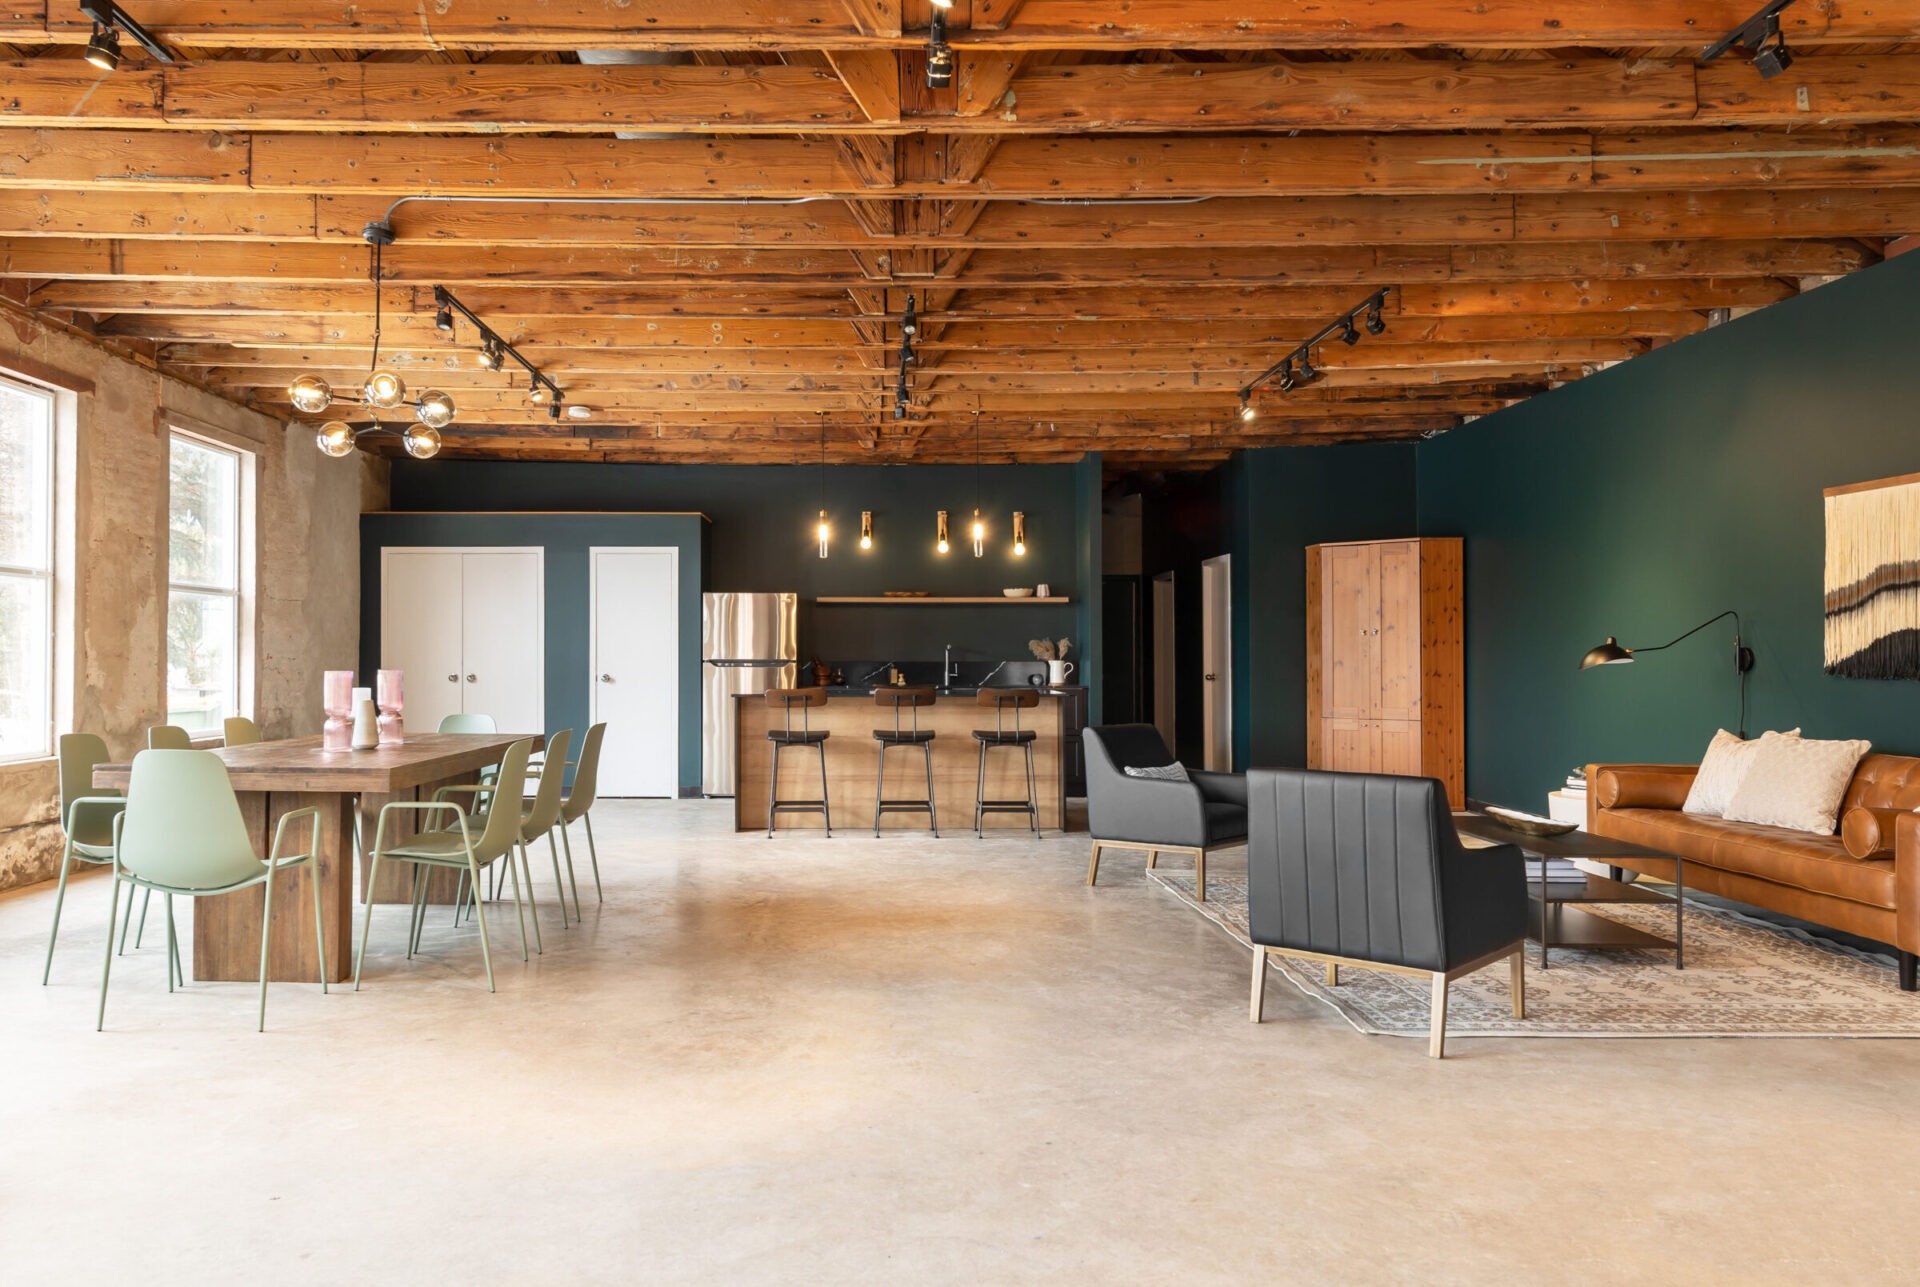 Modern industrial-style loft with exposed wooden ceiling beams, concrete floors, a dining area, a kitchen with bar stools, and a cozy sitting nook.